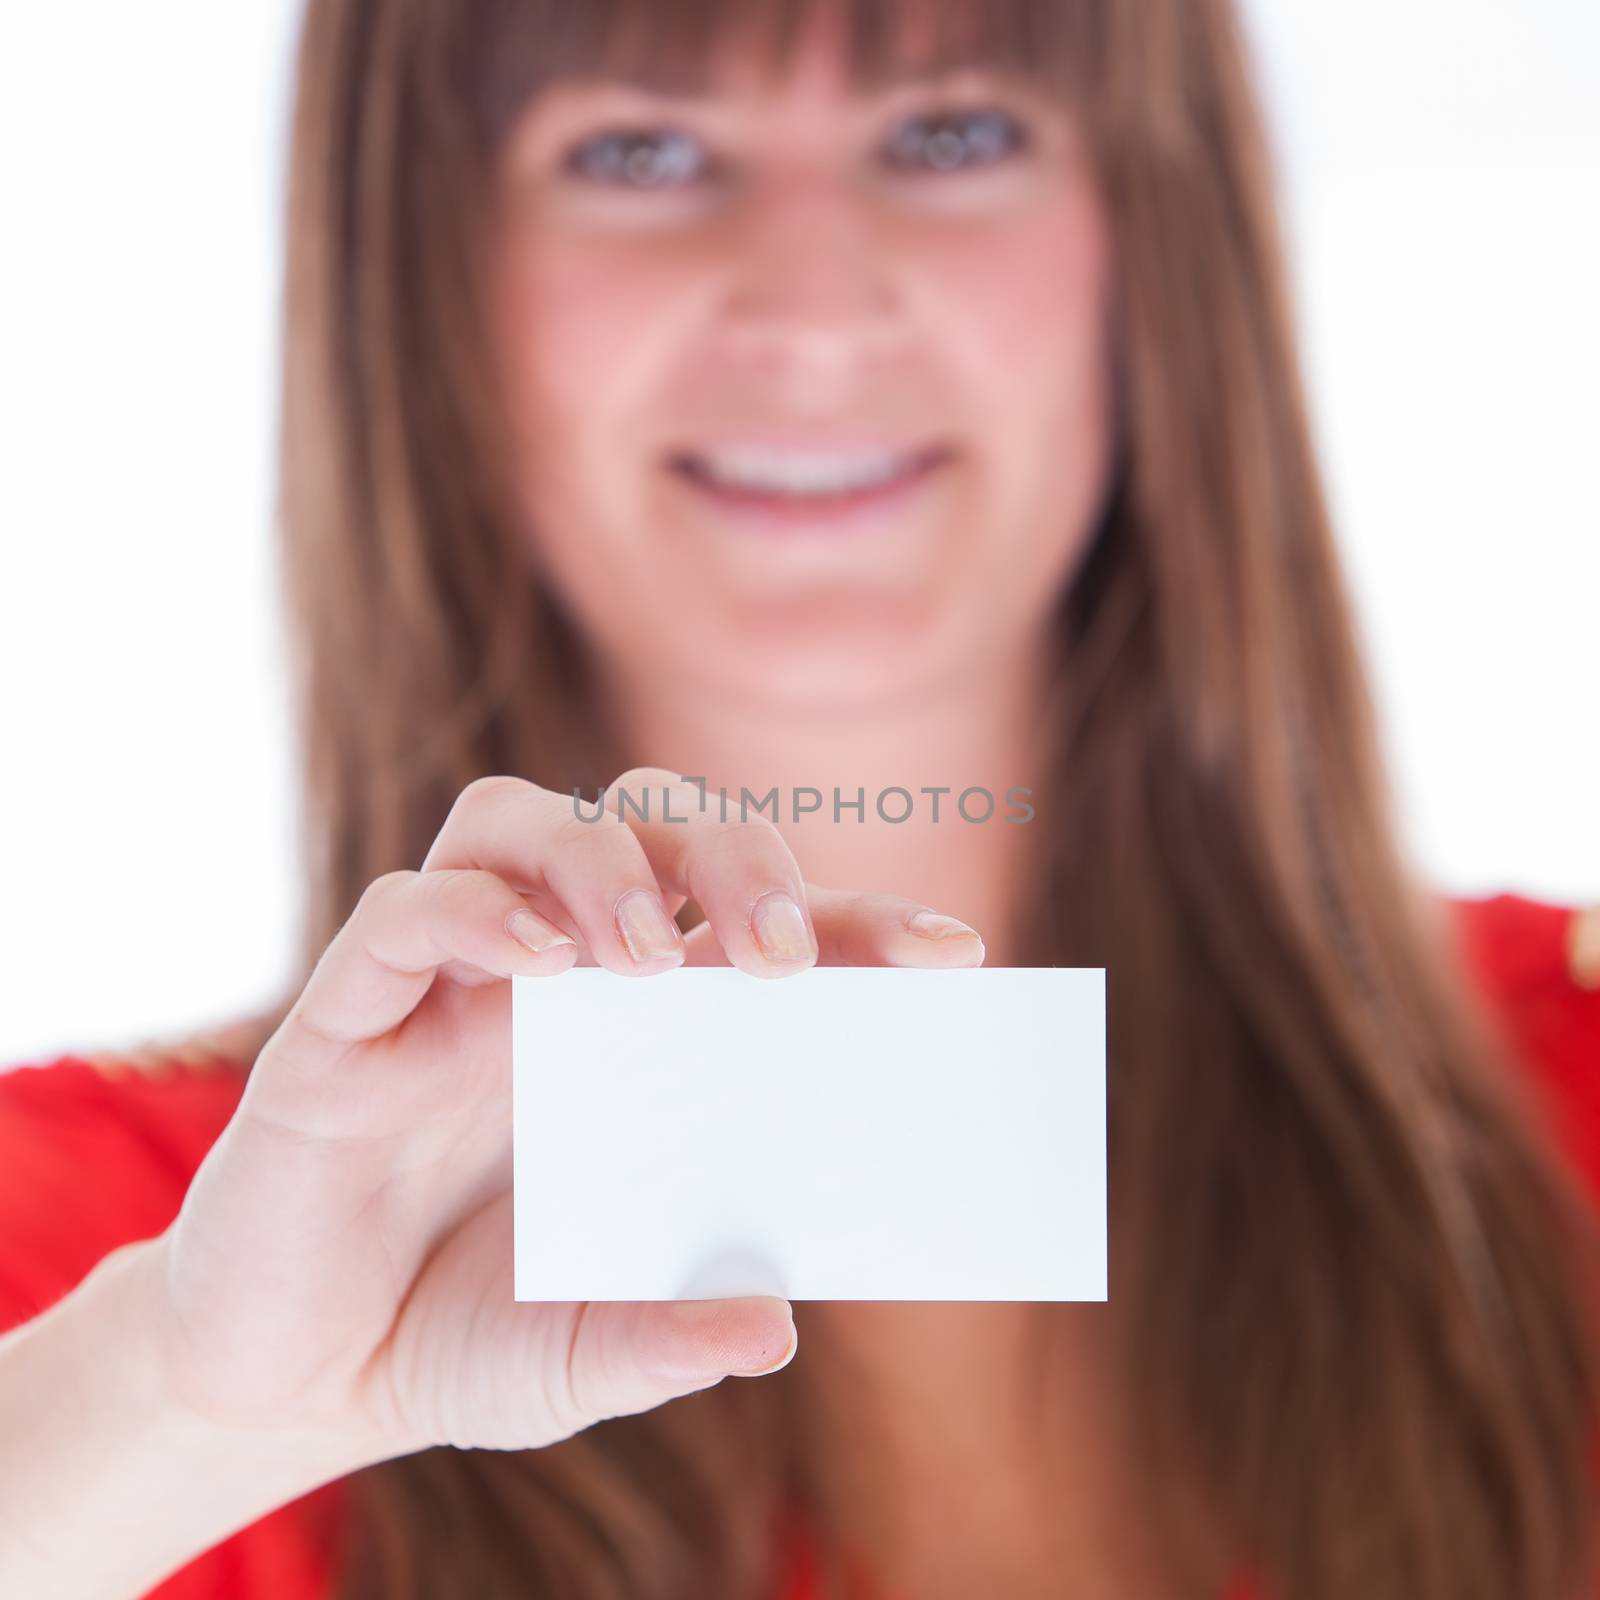 Woman showing a blank business card, close-up